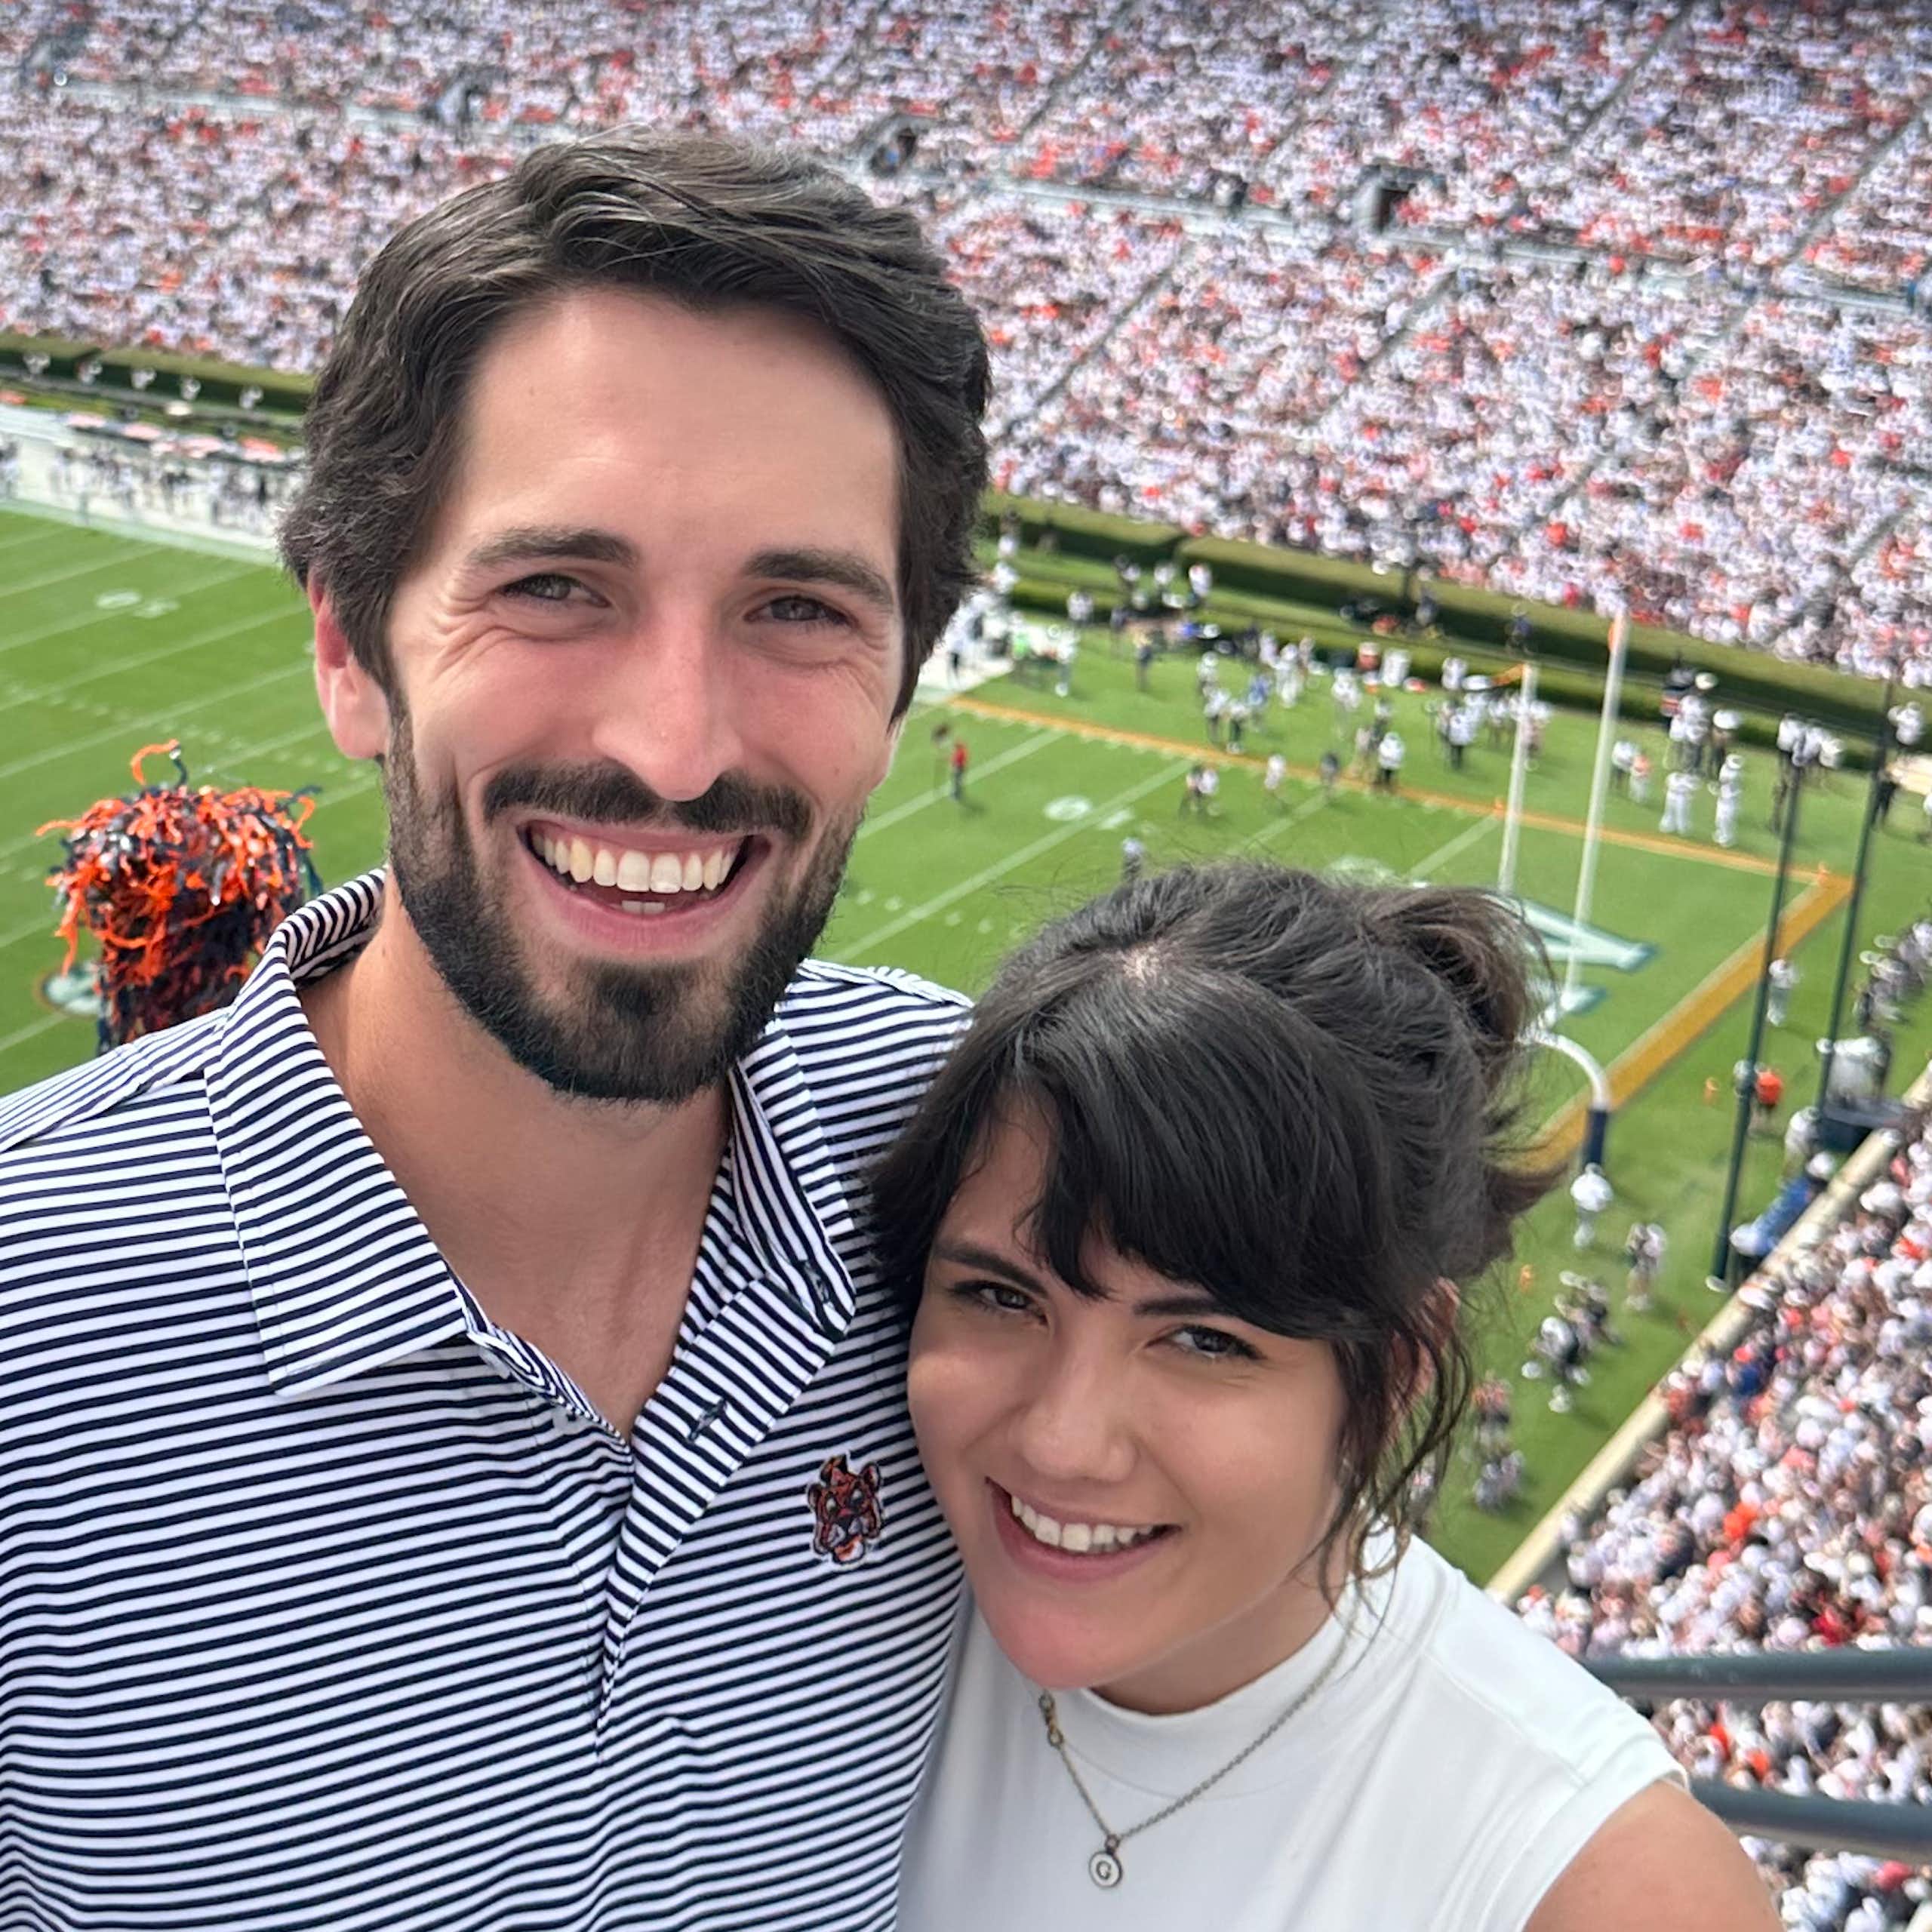 A smiling couple with a football stadium in the background.